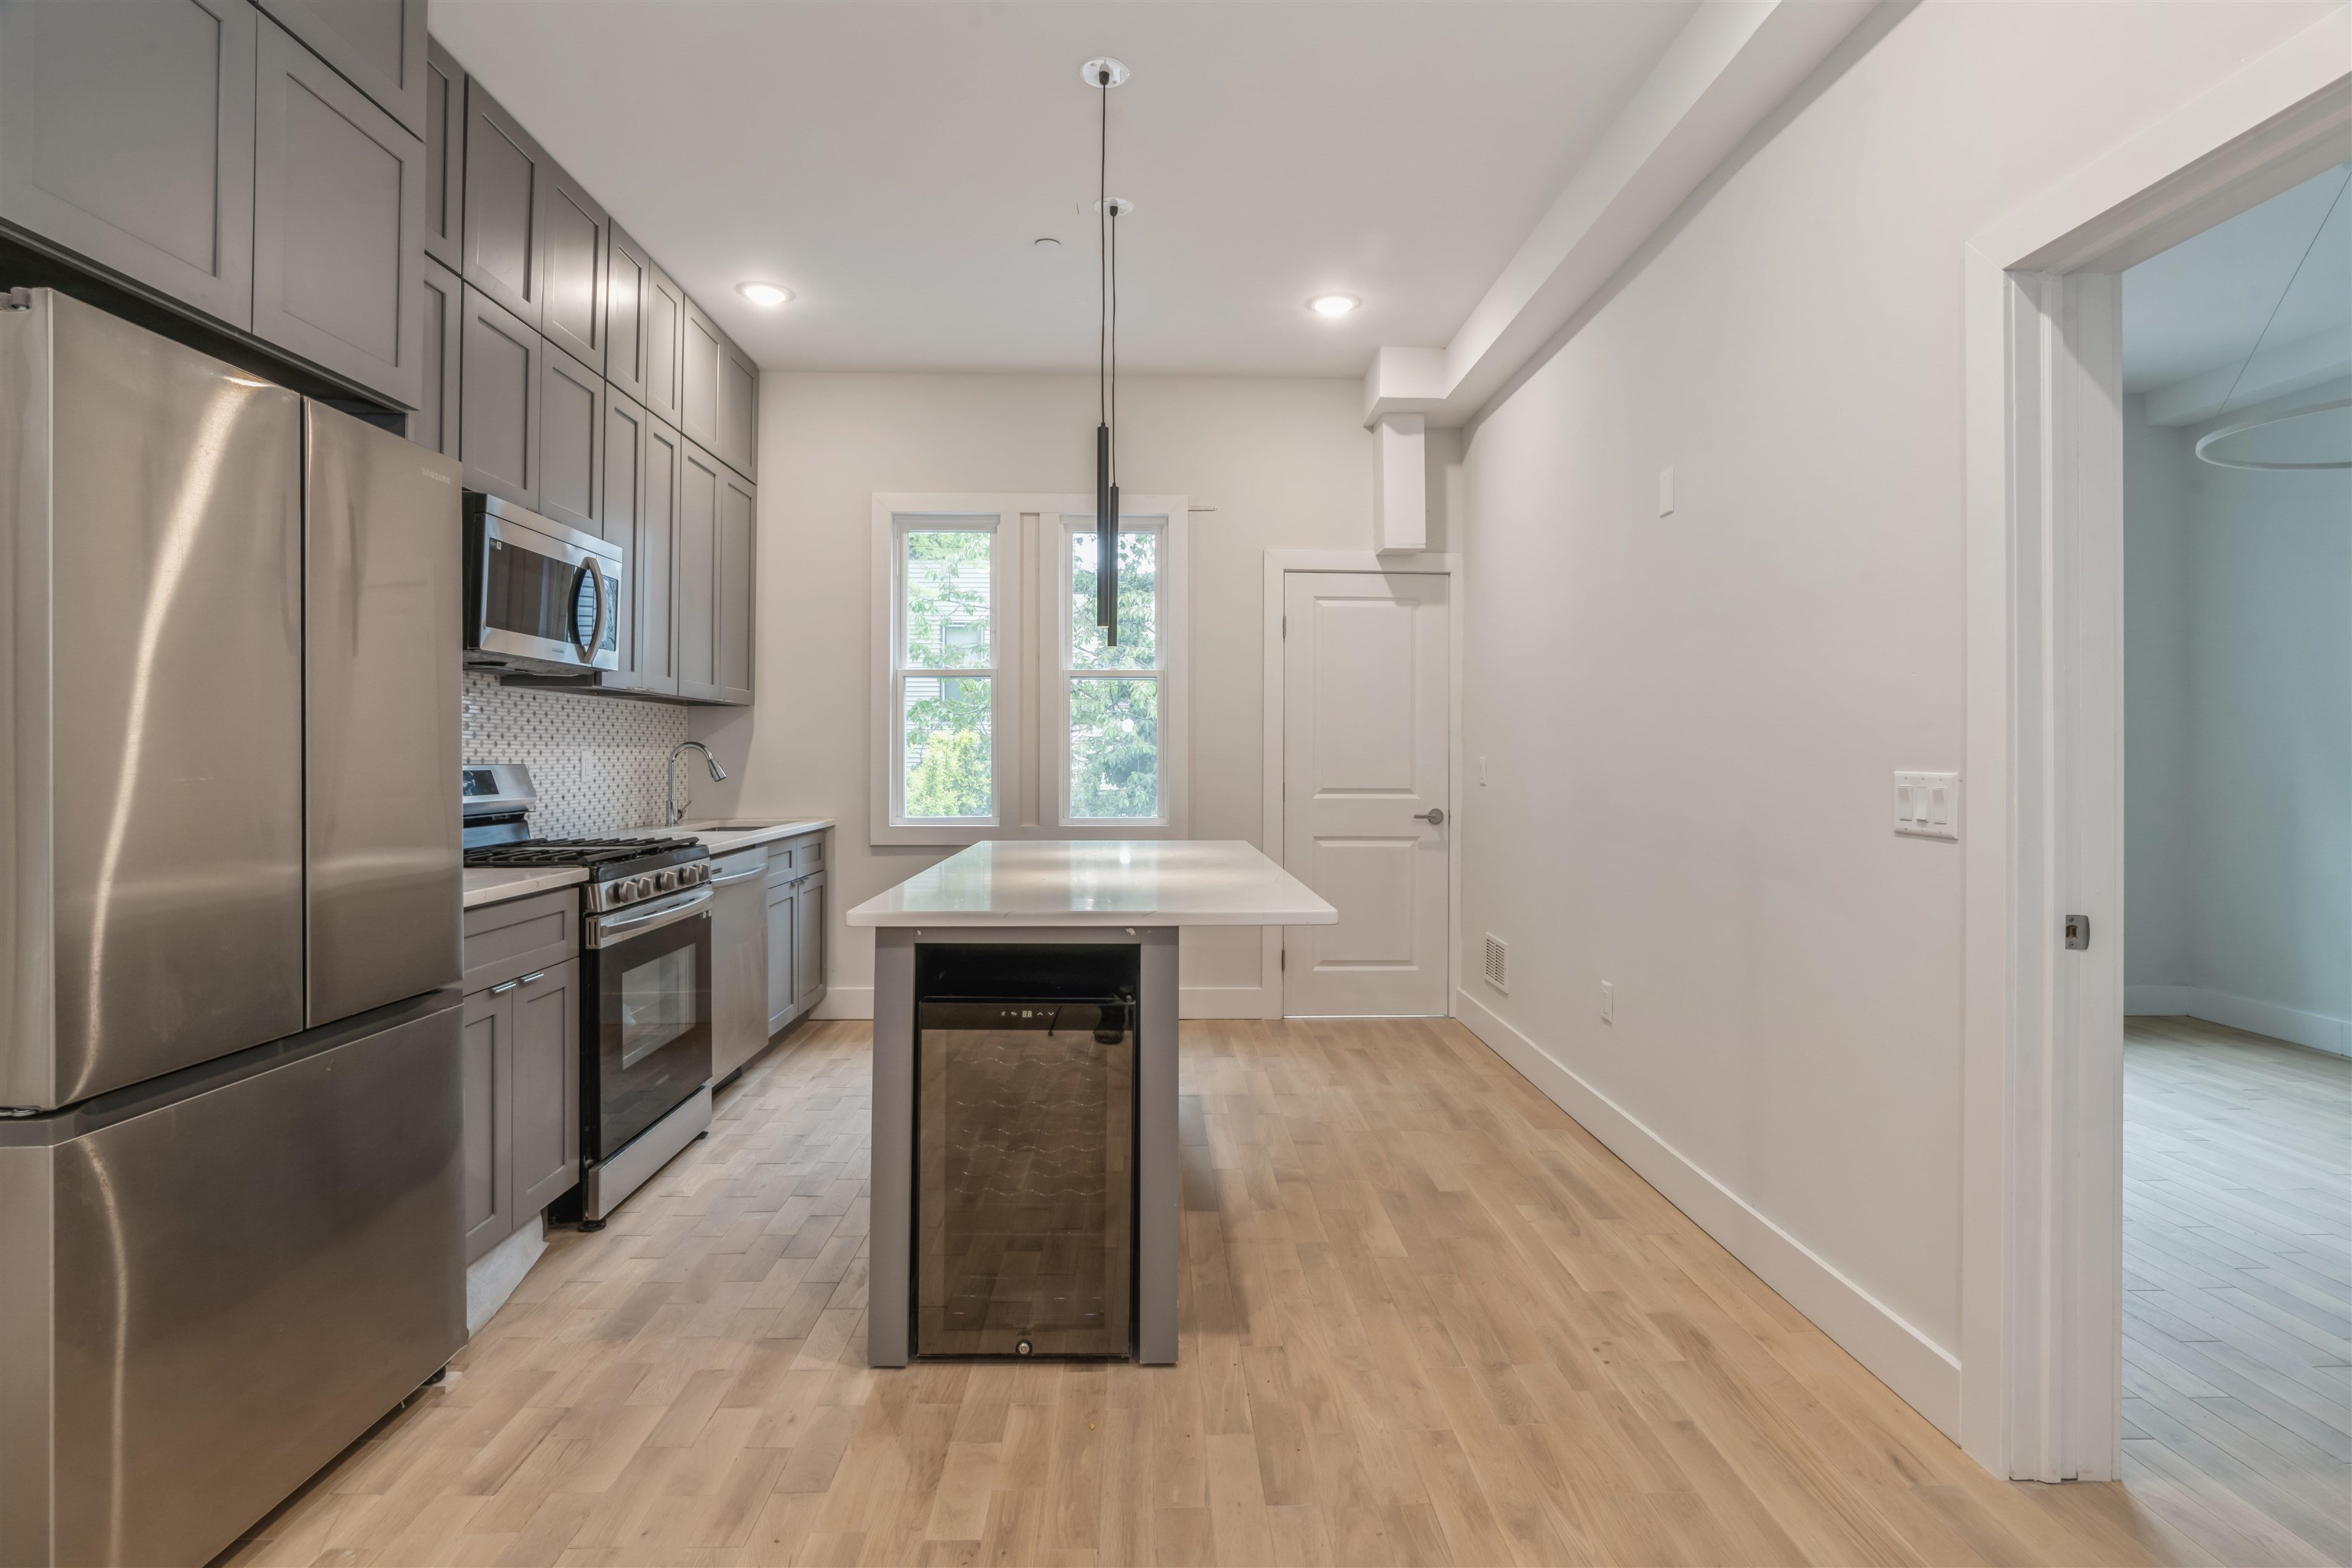 Jersey City Homes For Sale- 543 Palisade Ave #1C An amazing combination of  space and luxury is rarely found at this price point. 543 Palisade is a  Hudson NJ 07307 230008314